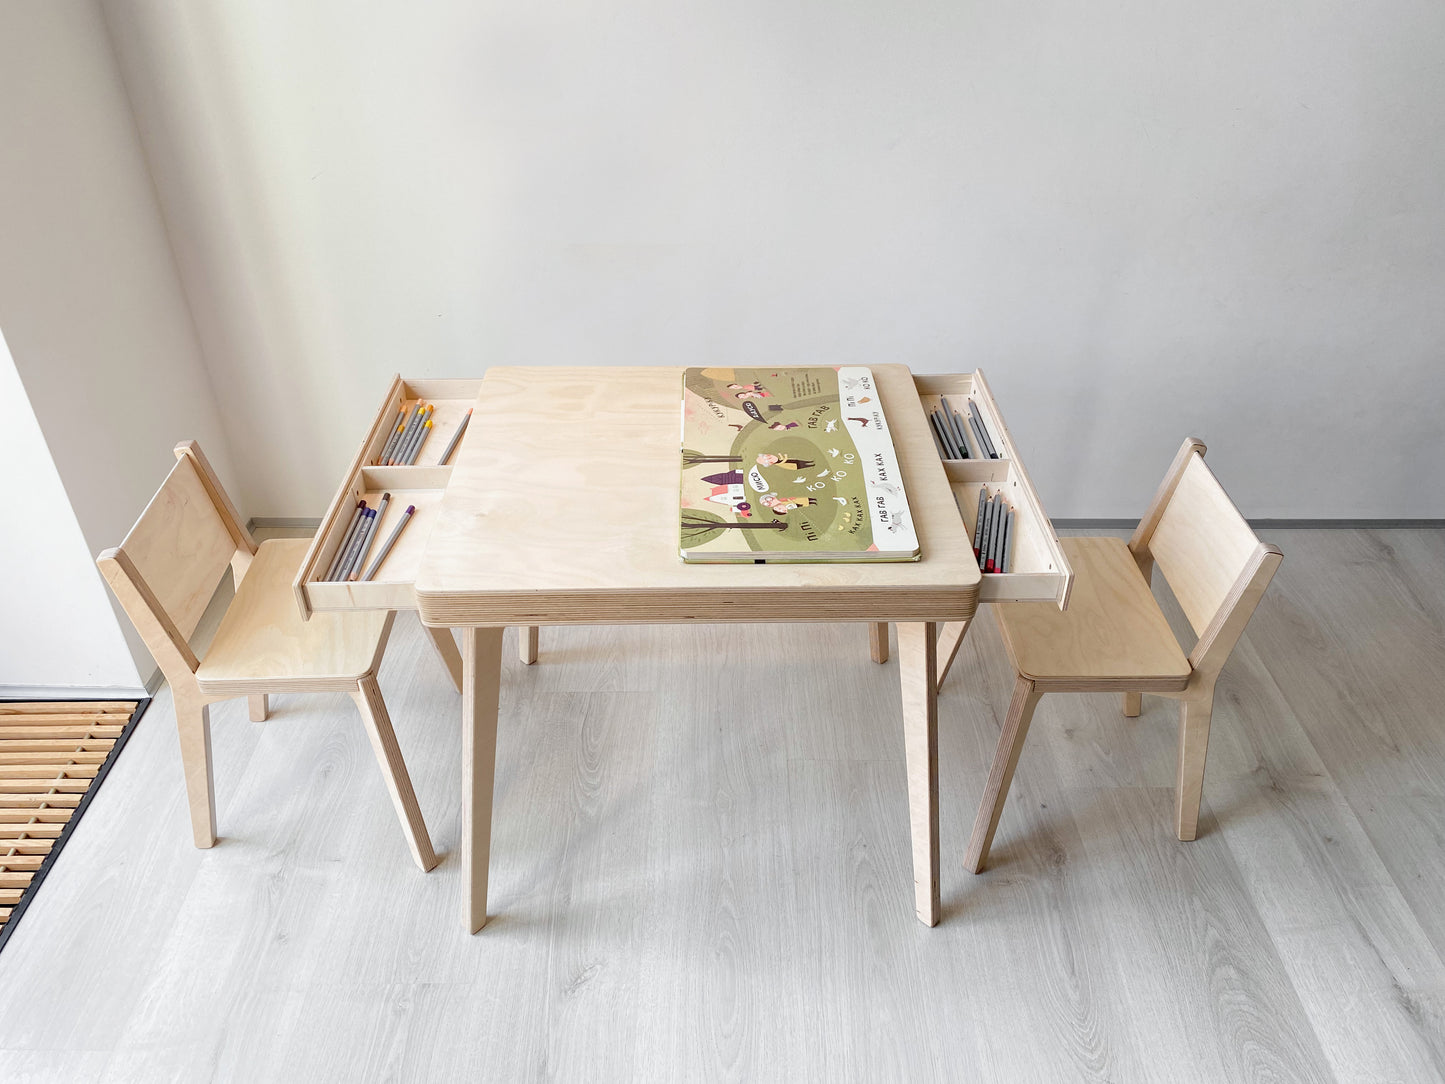 Table for TWINS - with 2 chairs and 2 drawers - for 1,5 to 8 years kids